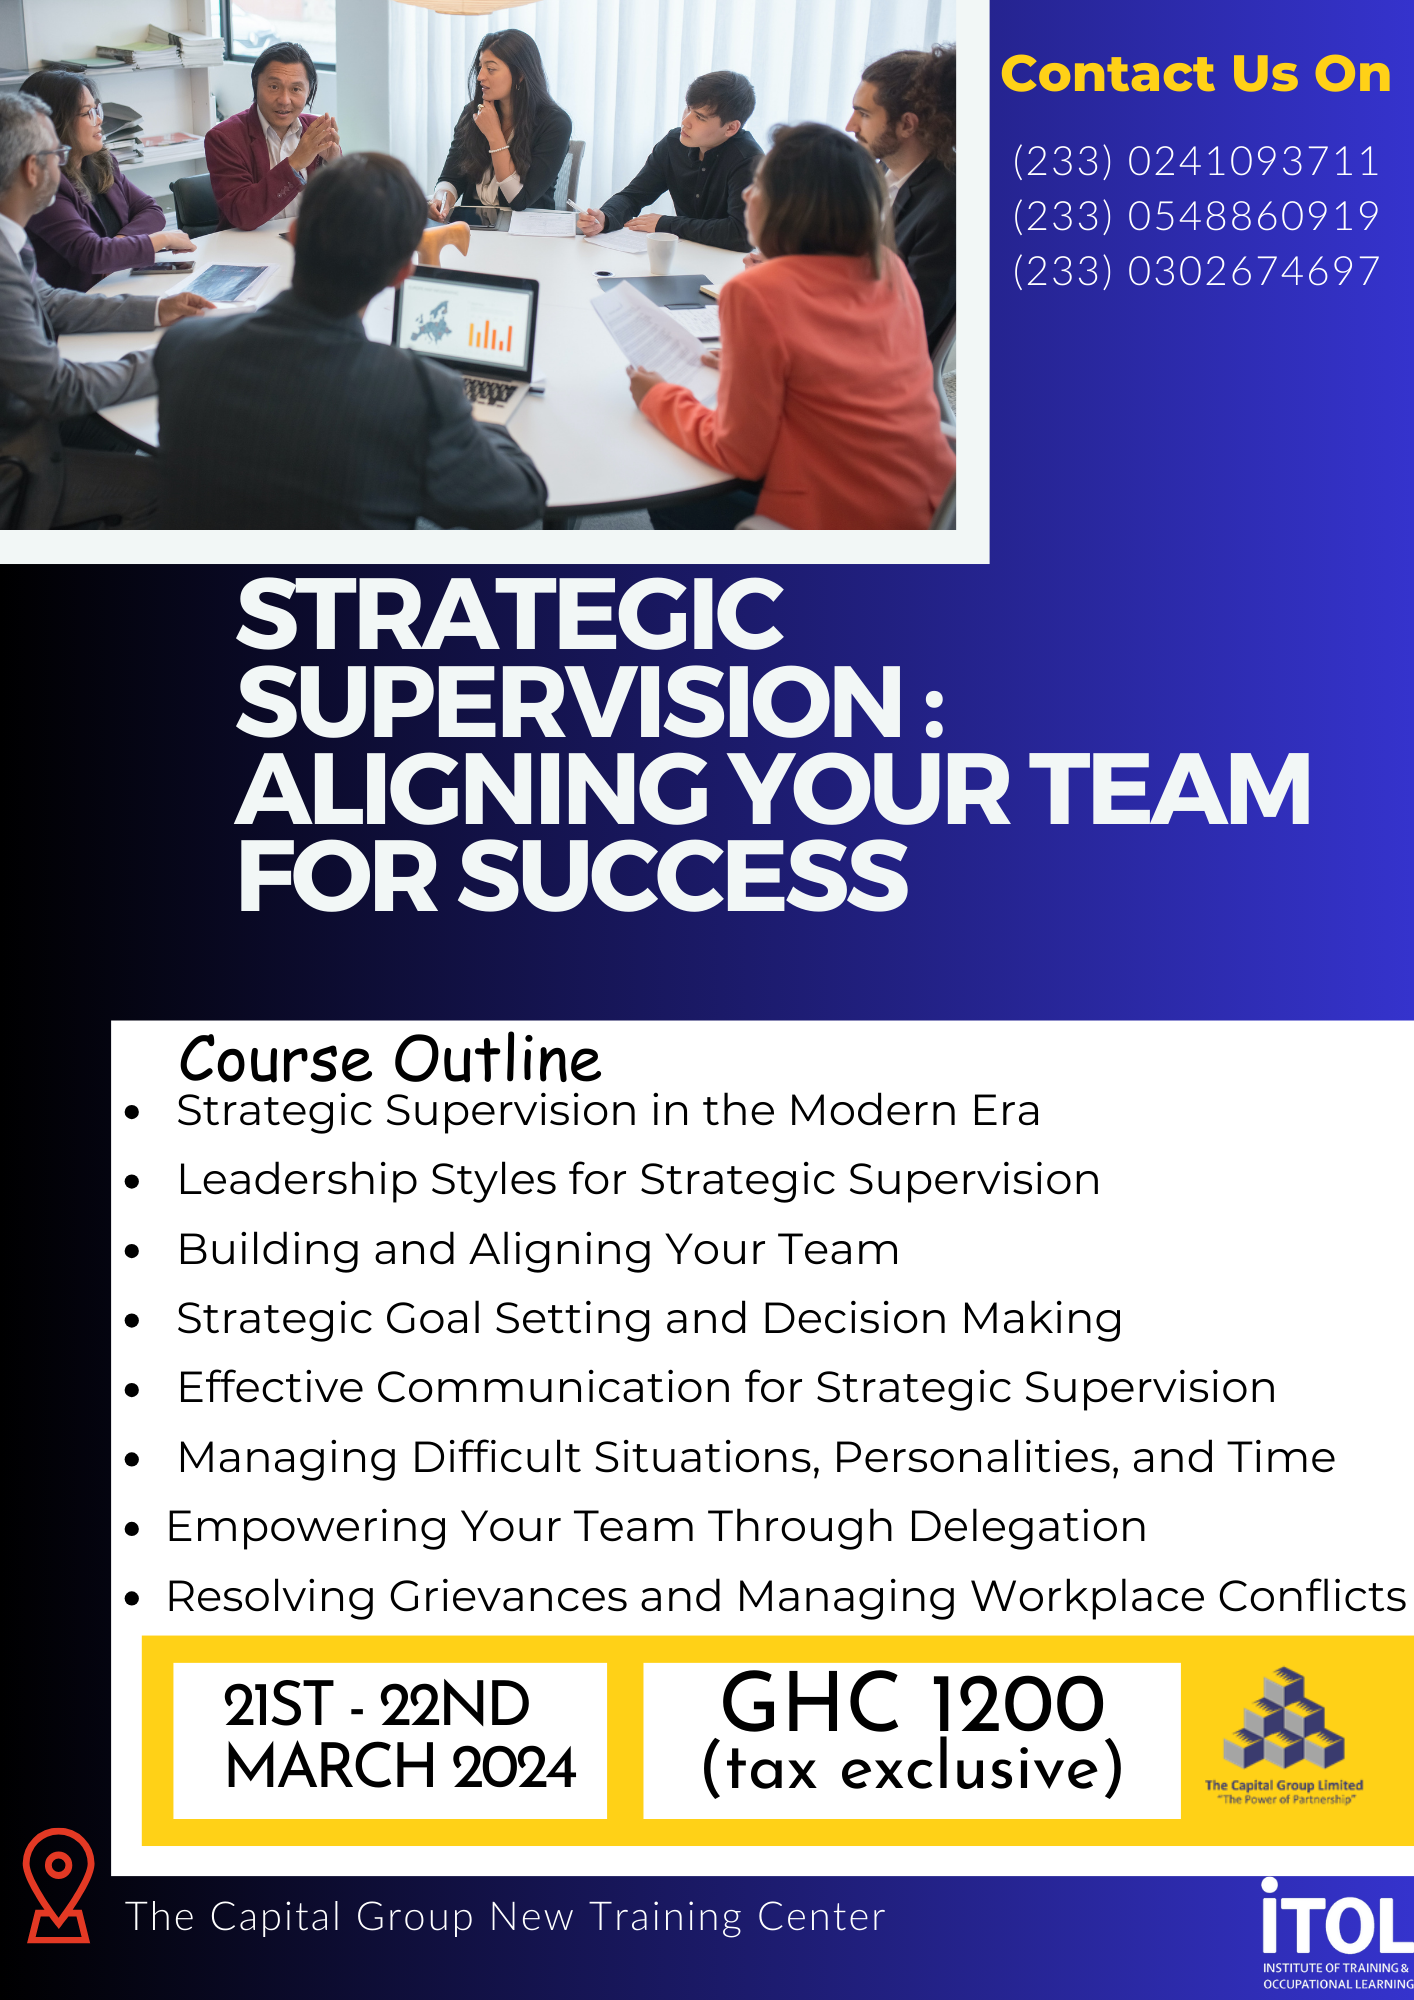 STRATEGIC SUPERVISION: ALIGNING YOUR TEAM FOR SUCCESS